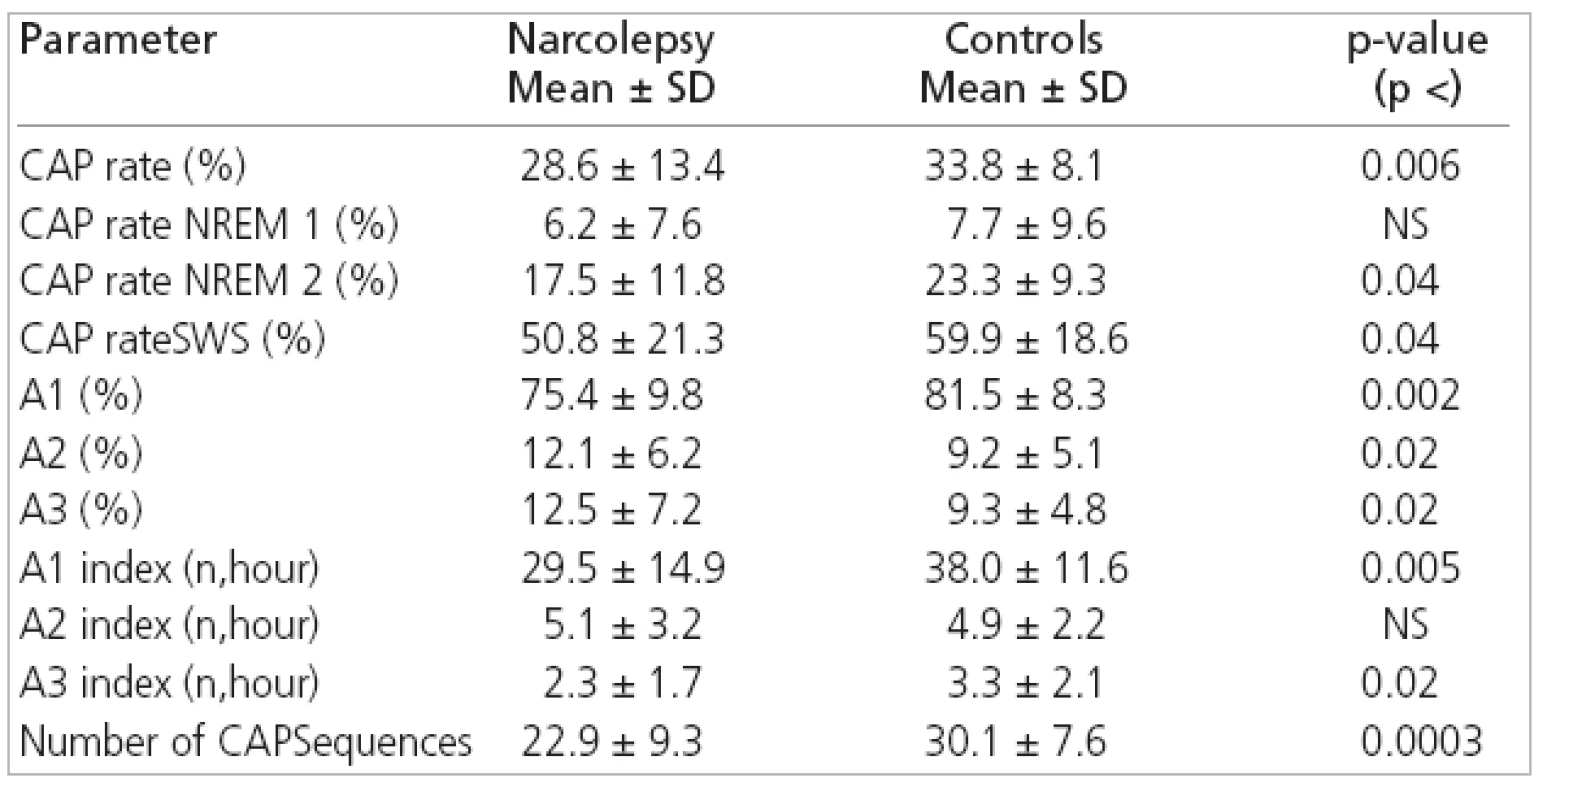 CAP parameters in narcoleptics and normal subjects.